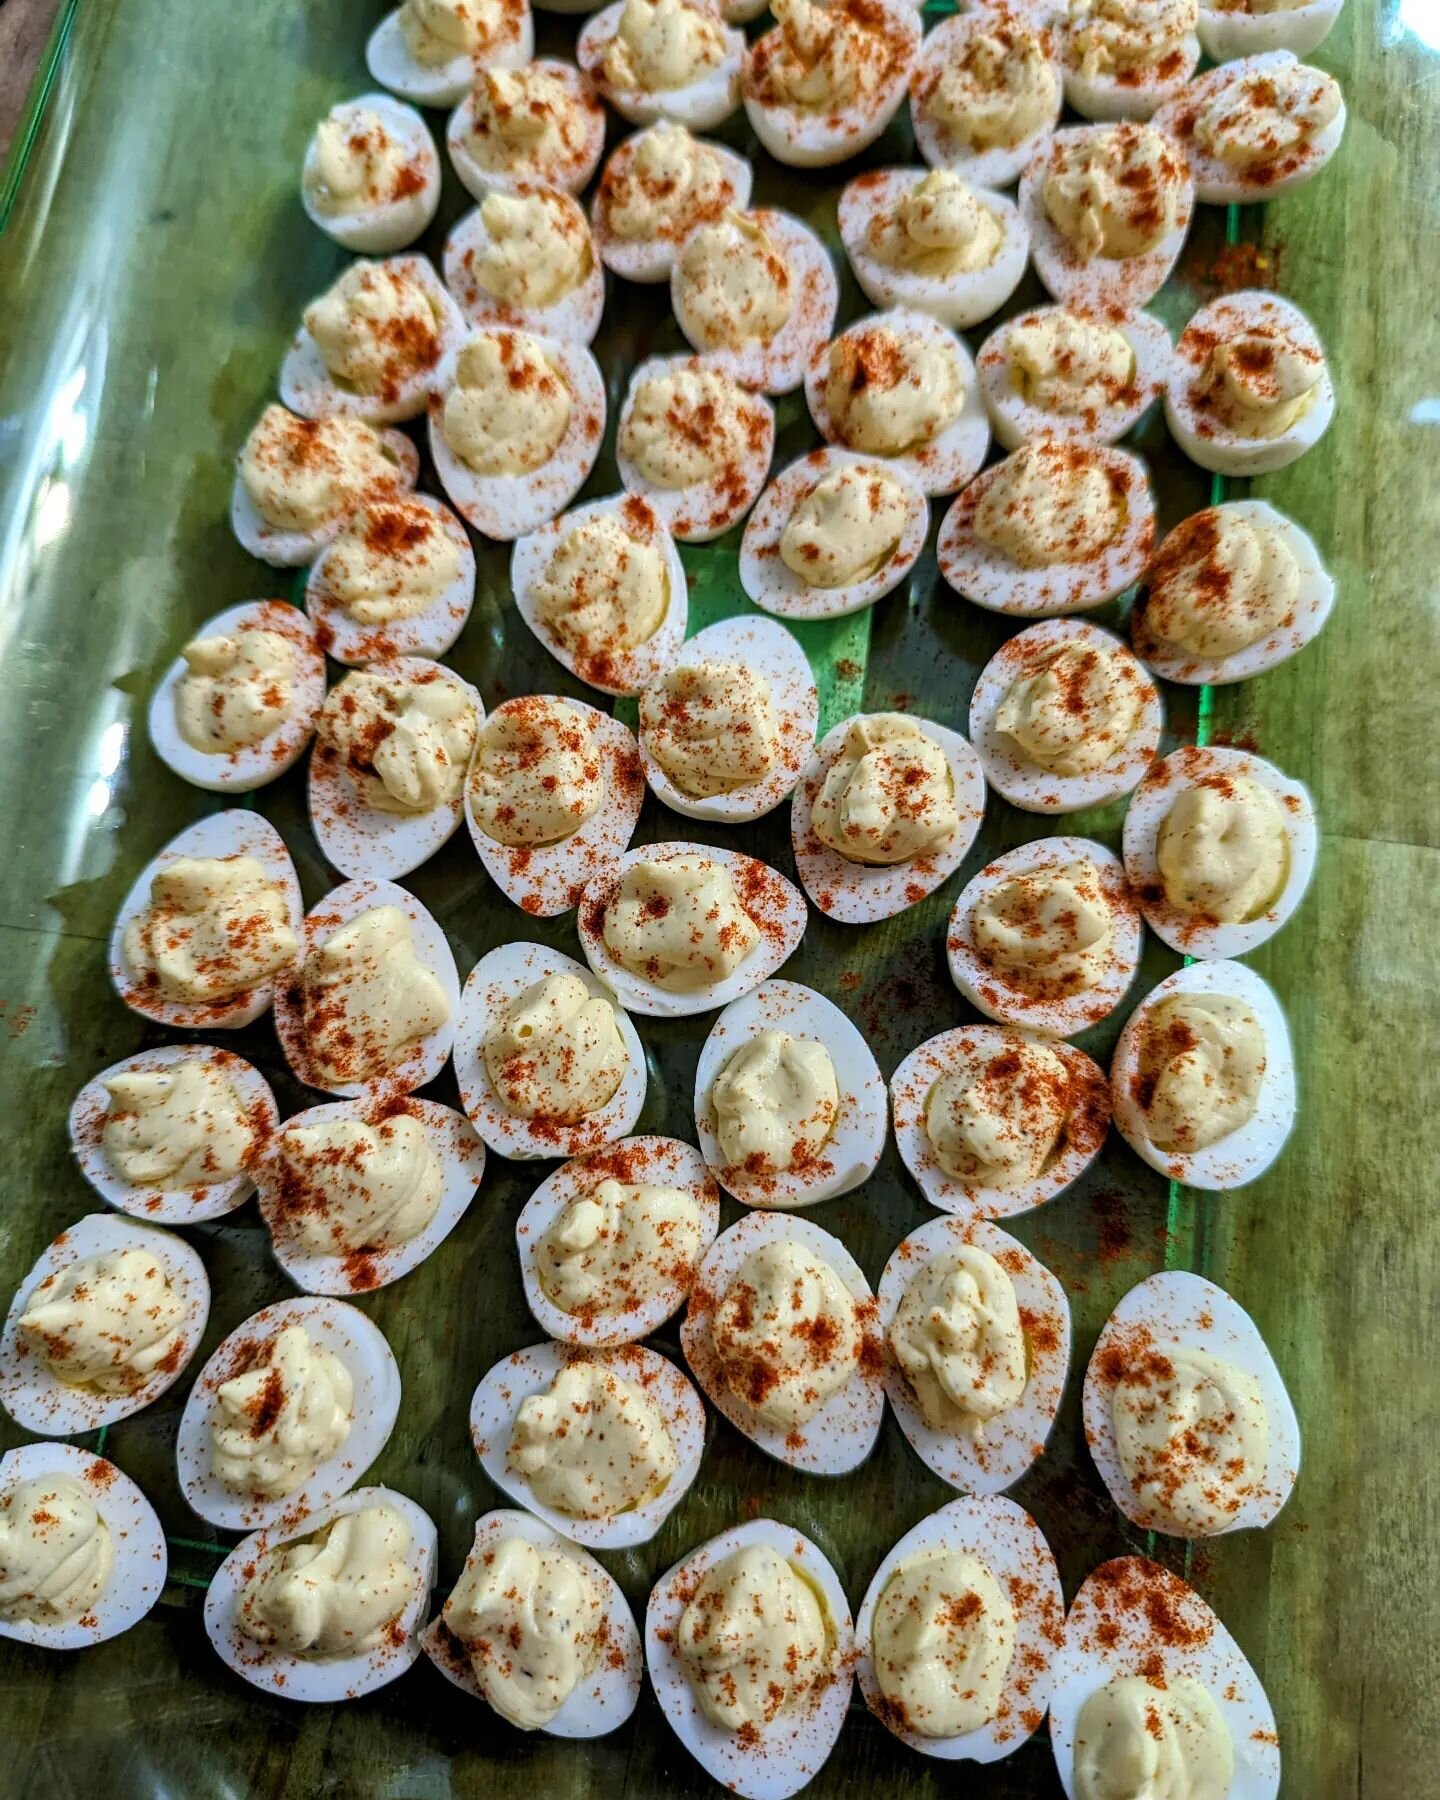 Deviled quail eggs for a Christmas appetizer😋

I don't have a set recipe. But to the egg yolks just add mayo, yellow mustard, white vinegar, a little salt and pepper. Taste to make sure you nailed it and finish with a sprinkle of paprika👌🏻

Just f